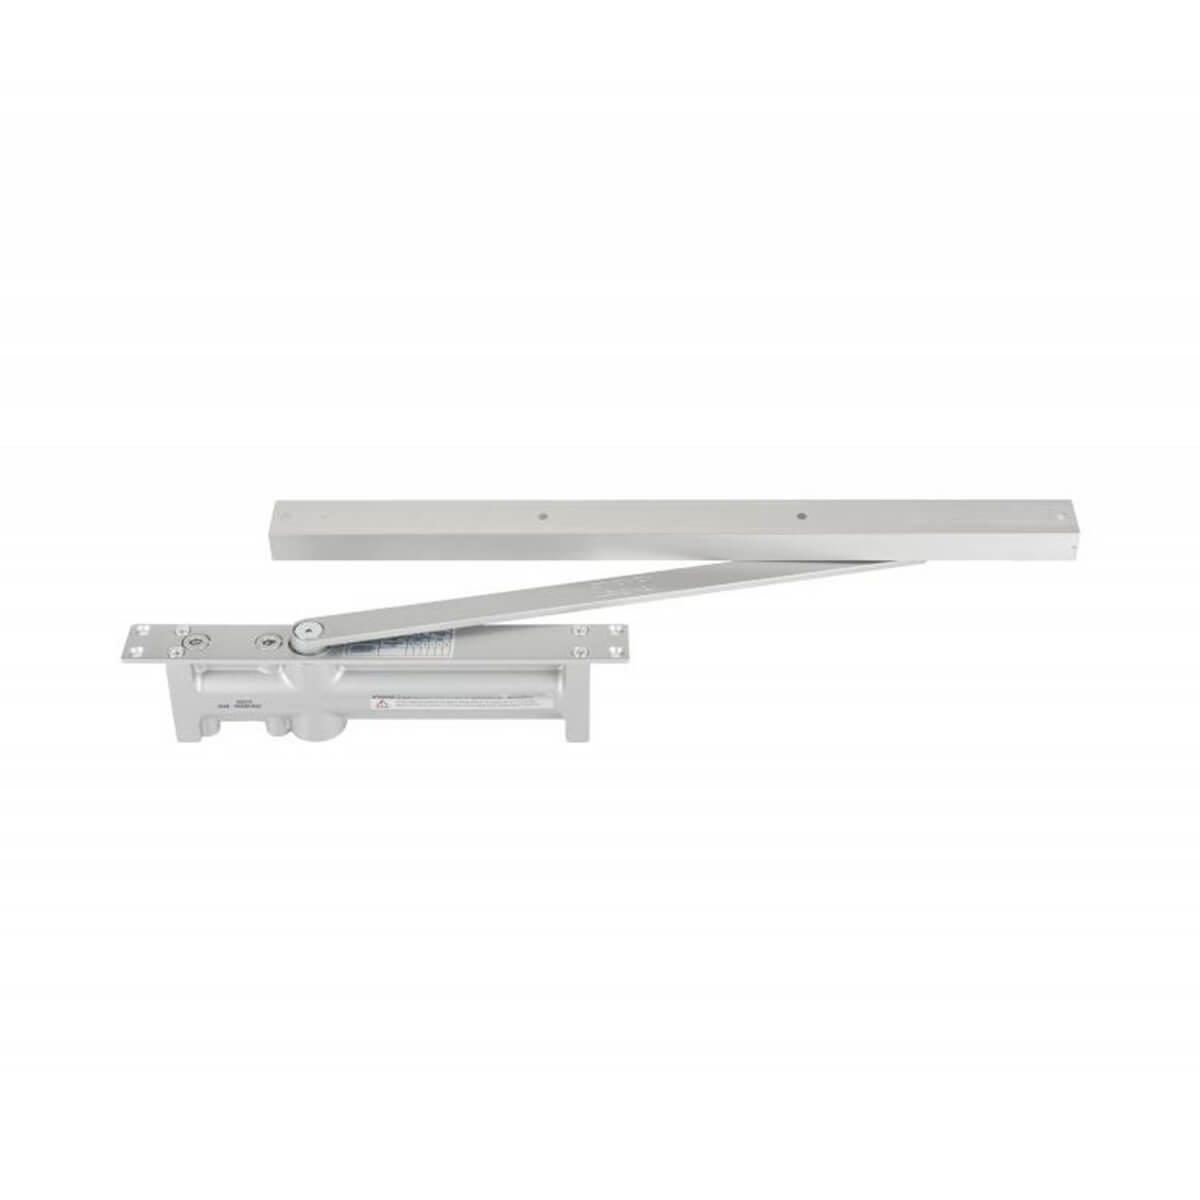 Concealed Overhead Door Closer, Fixed Power Size 3, Matching Finish Track And Connecting Arm, Silver Finish